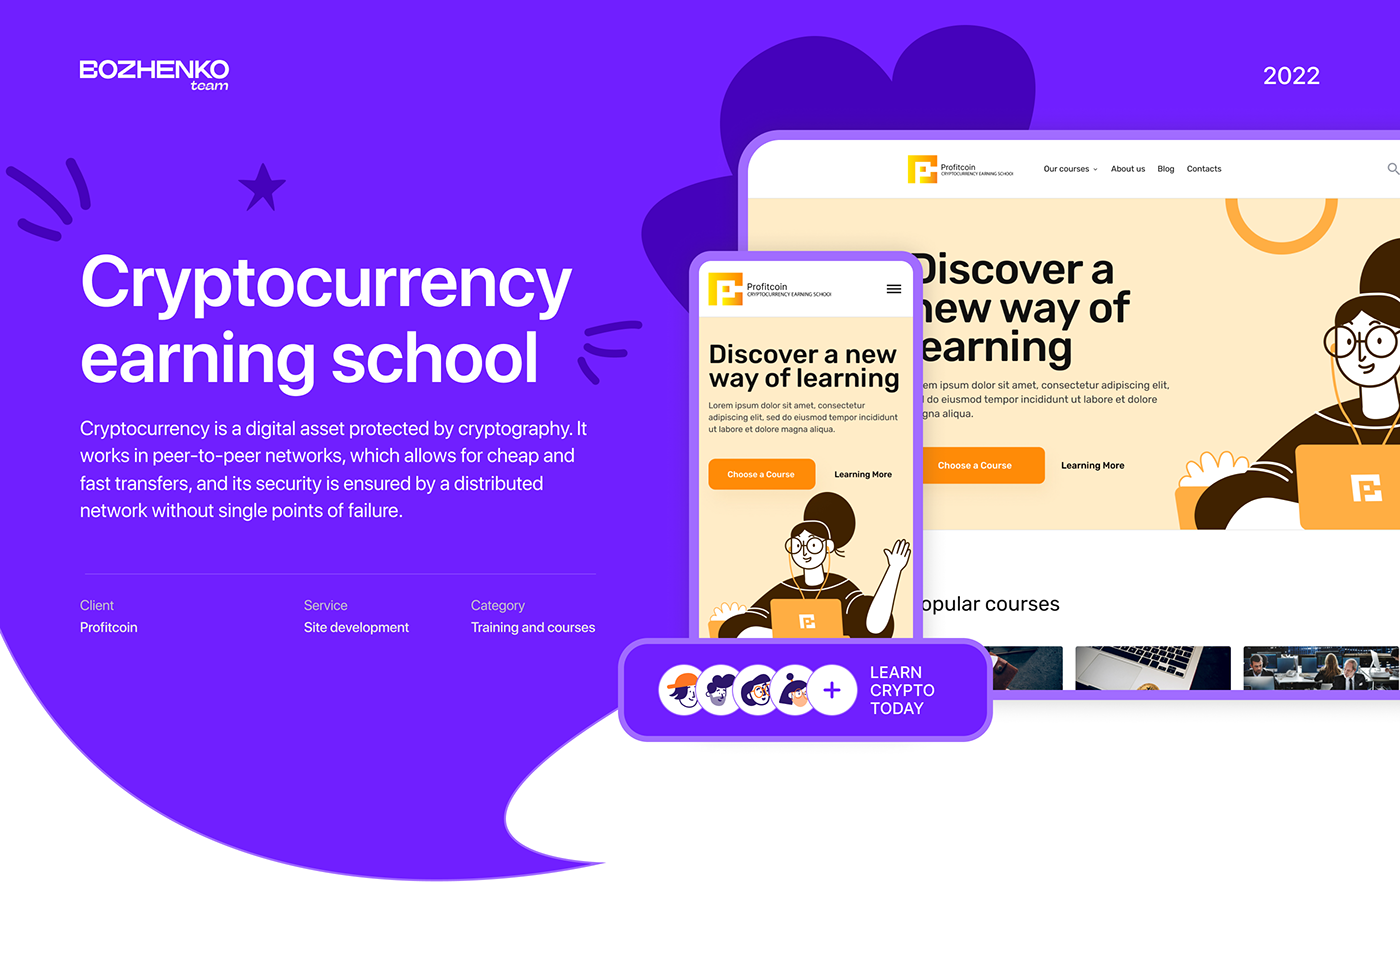 cryptocurrency school earning corporate marketing   courses course курс Инфобизнес